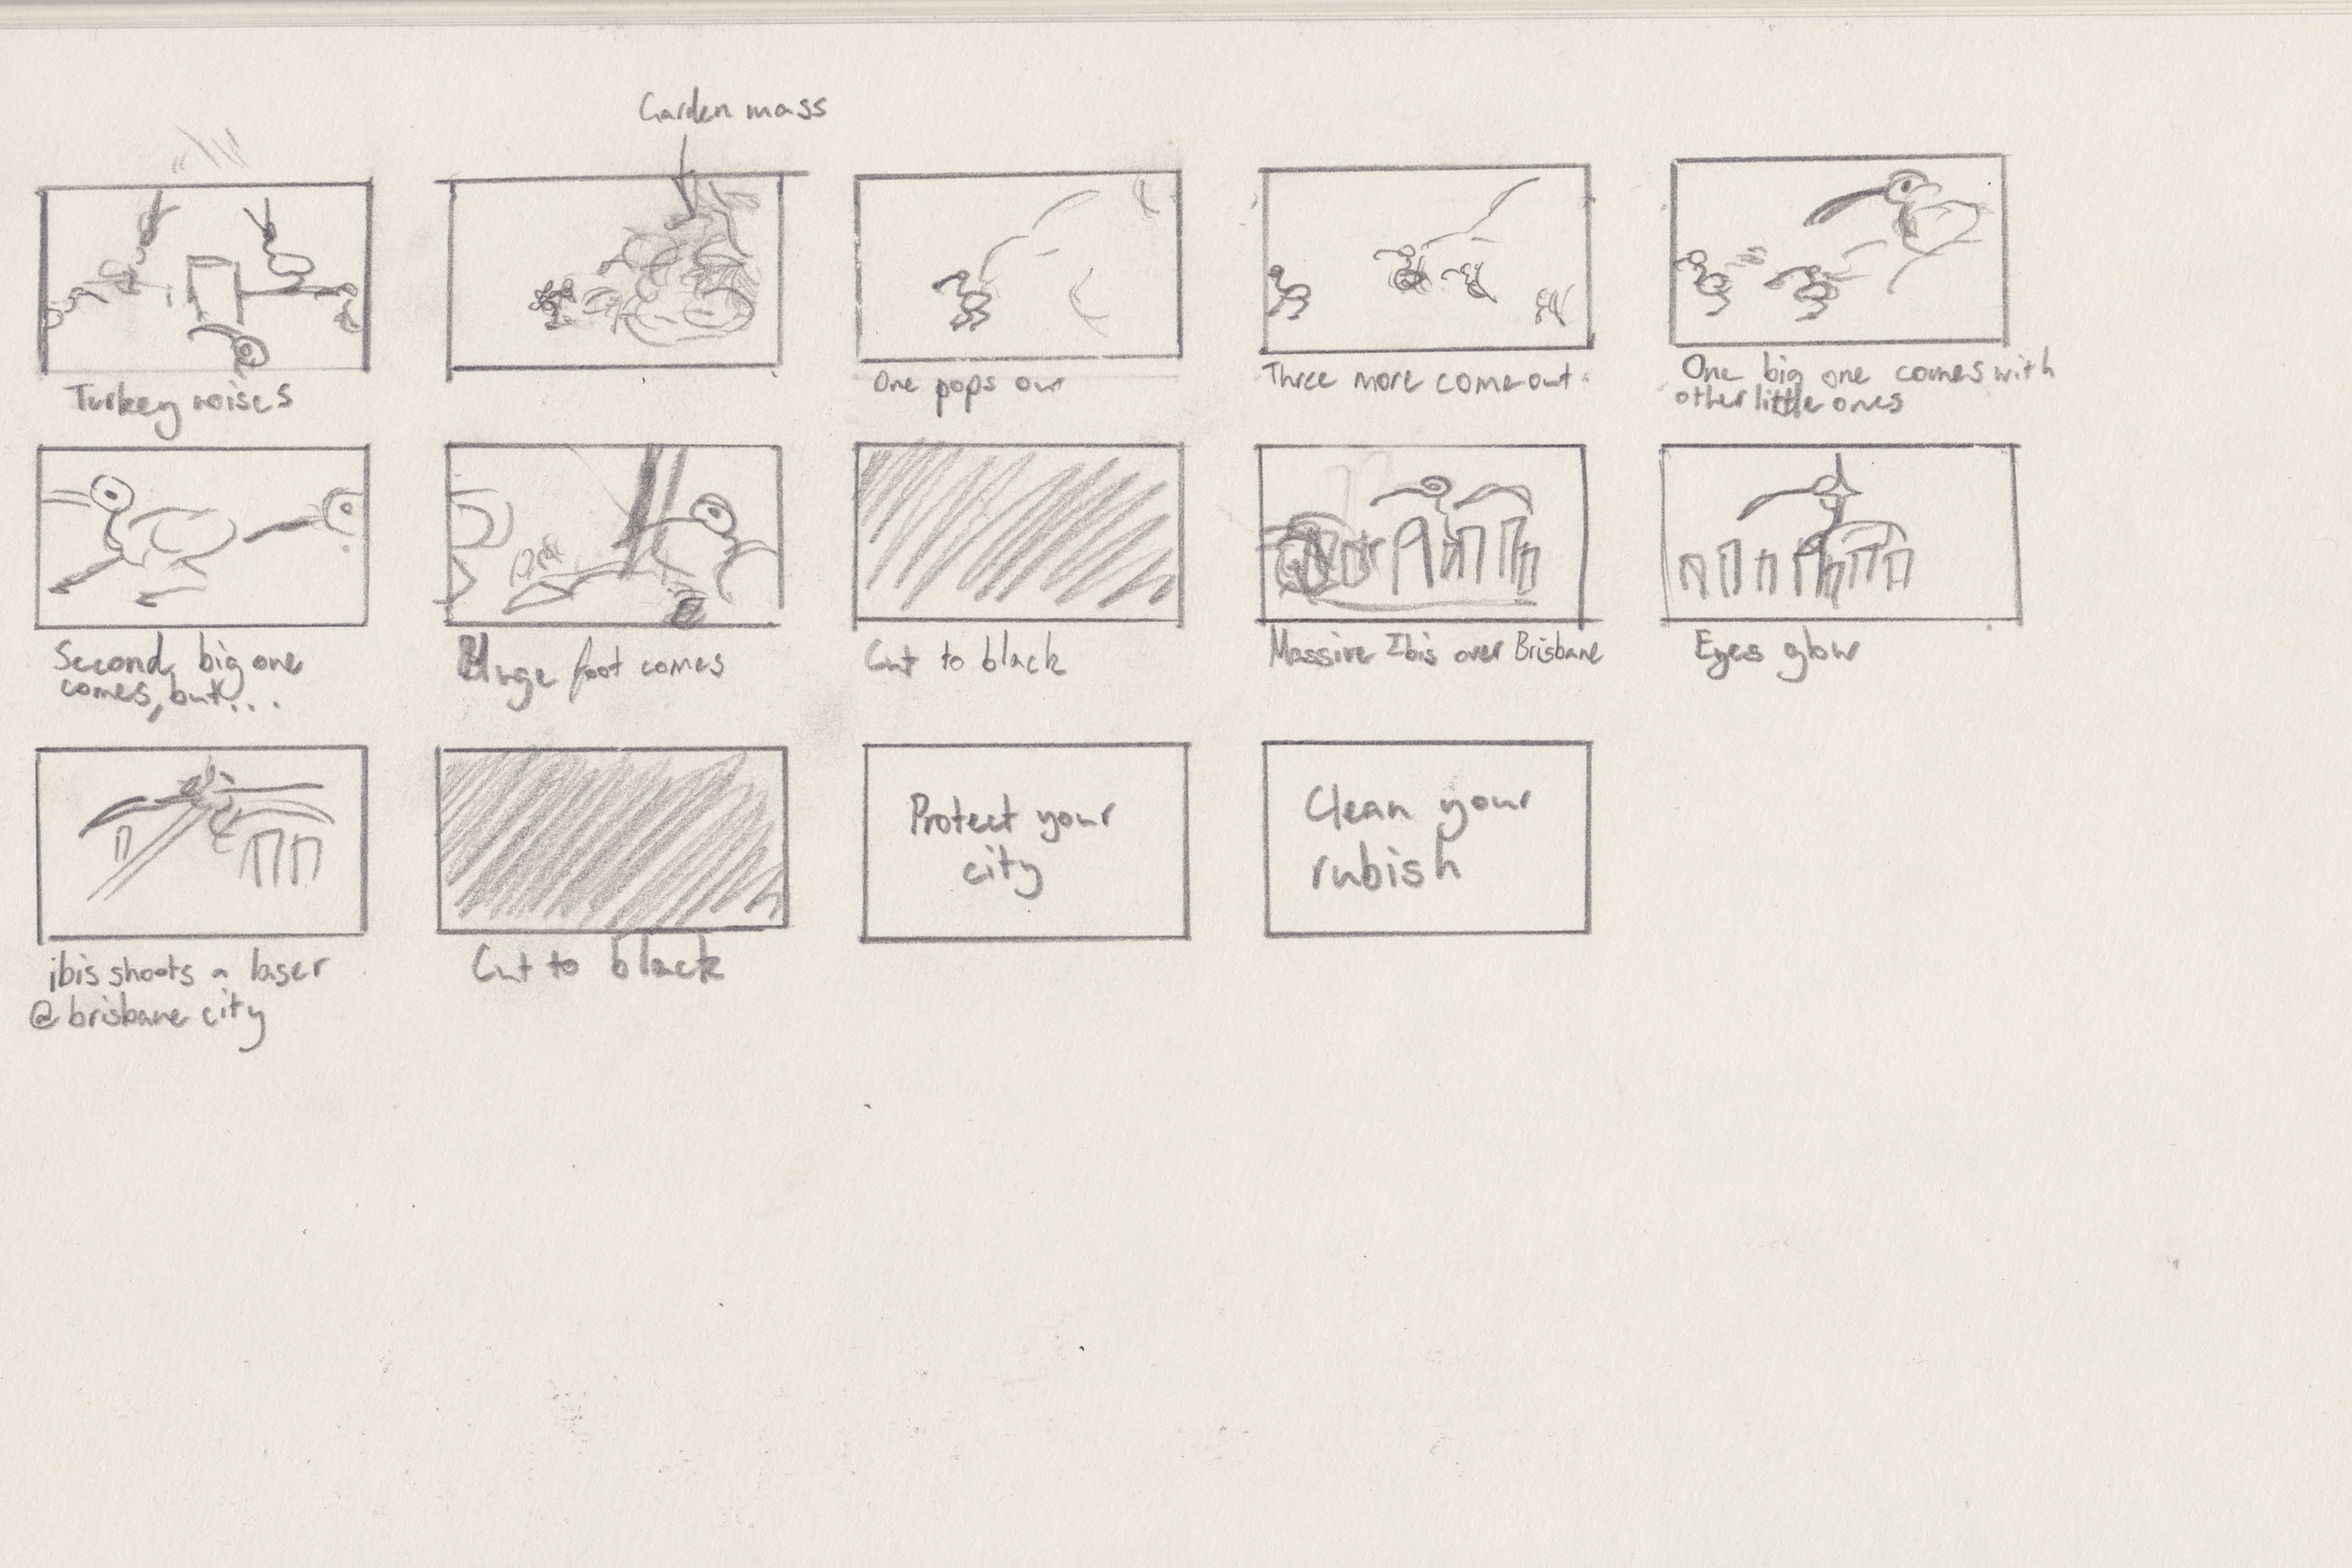 Storyboard Page 2